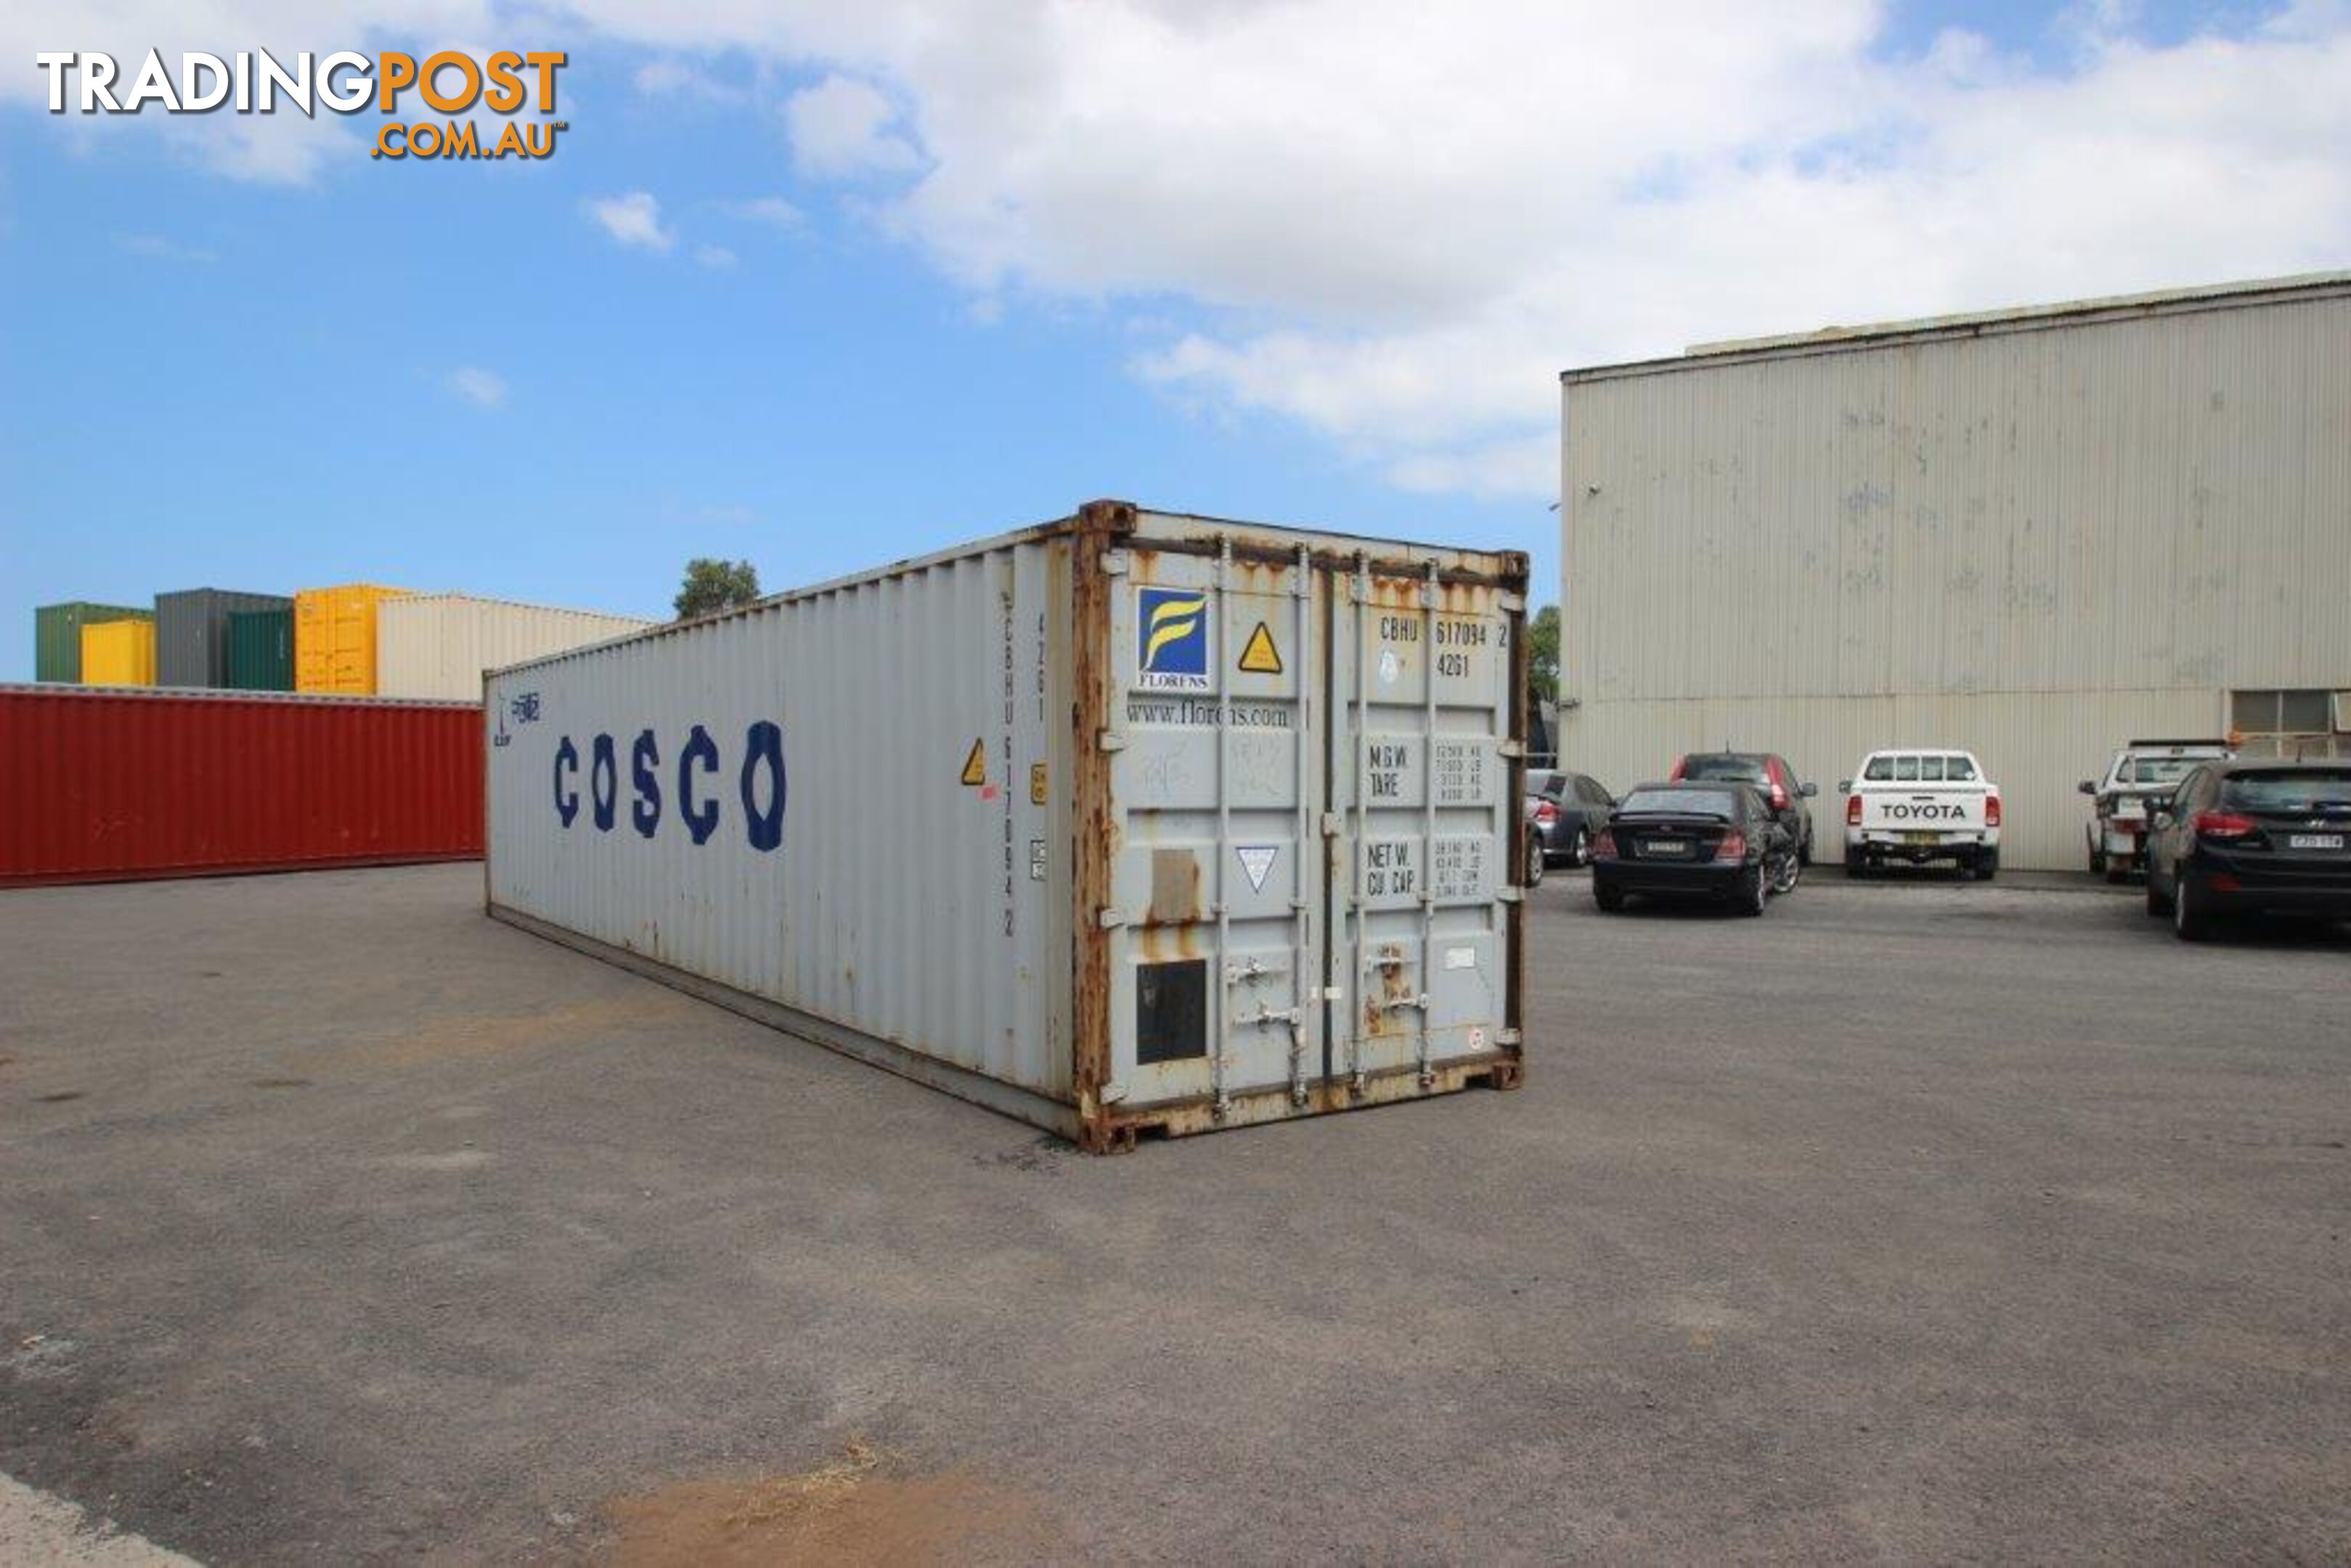 Used 40ft Shipping Containers Whyalla - From $3950 + GST